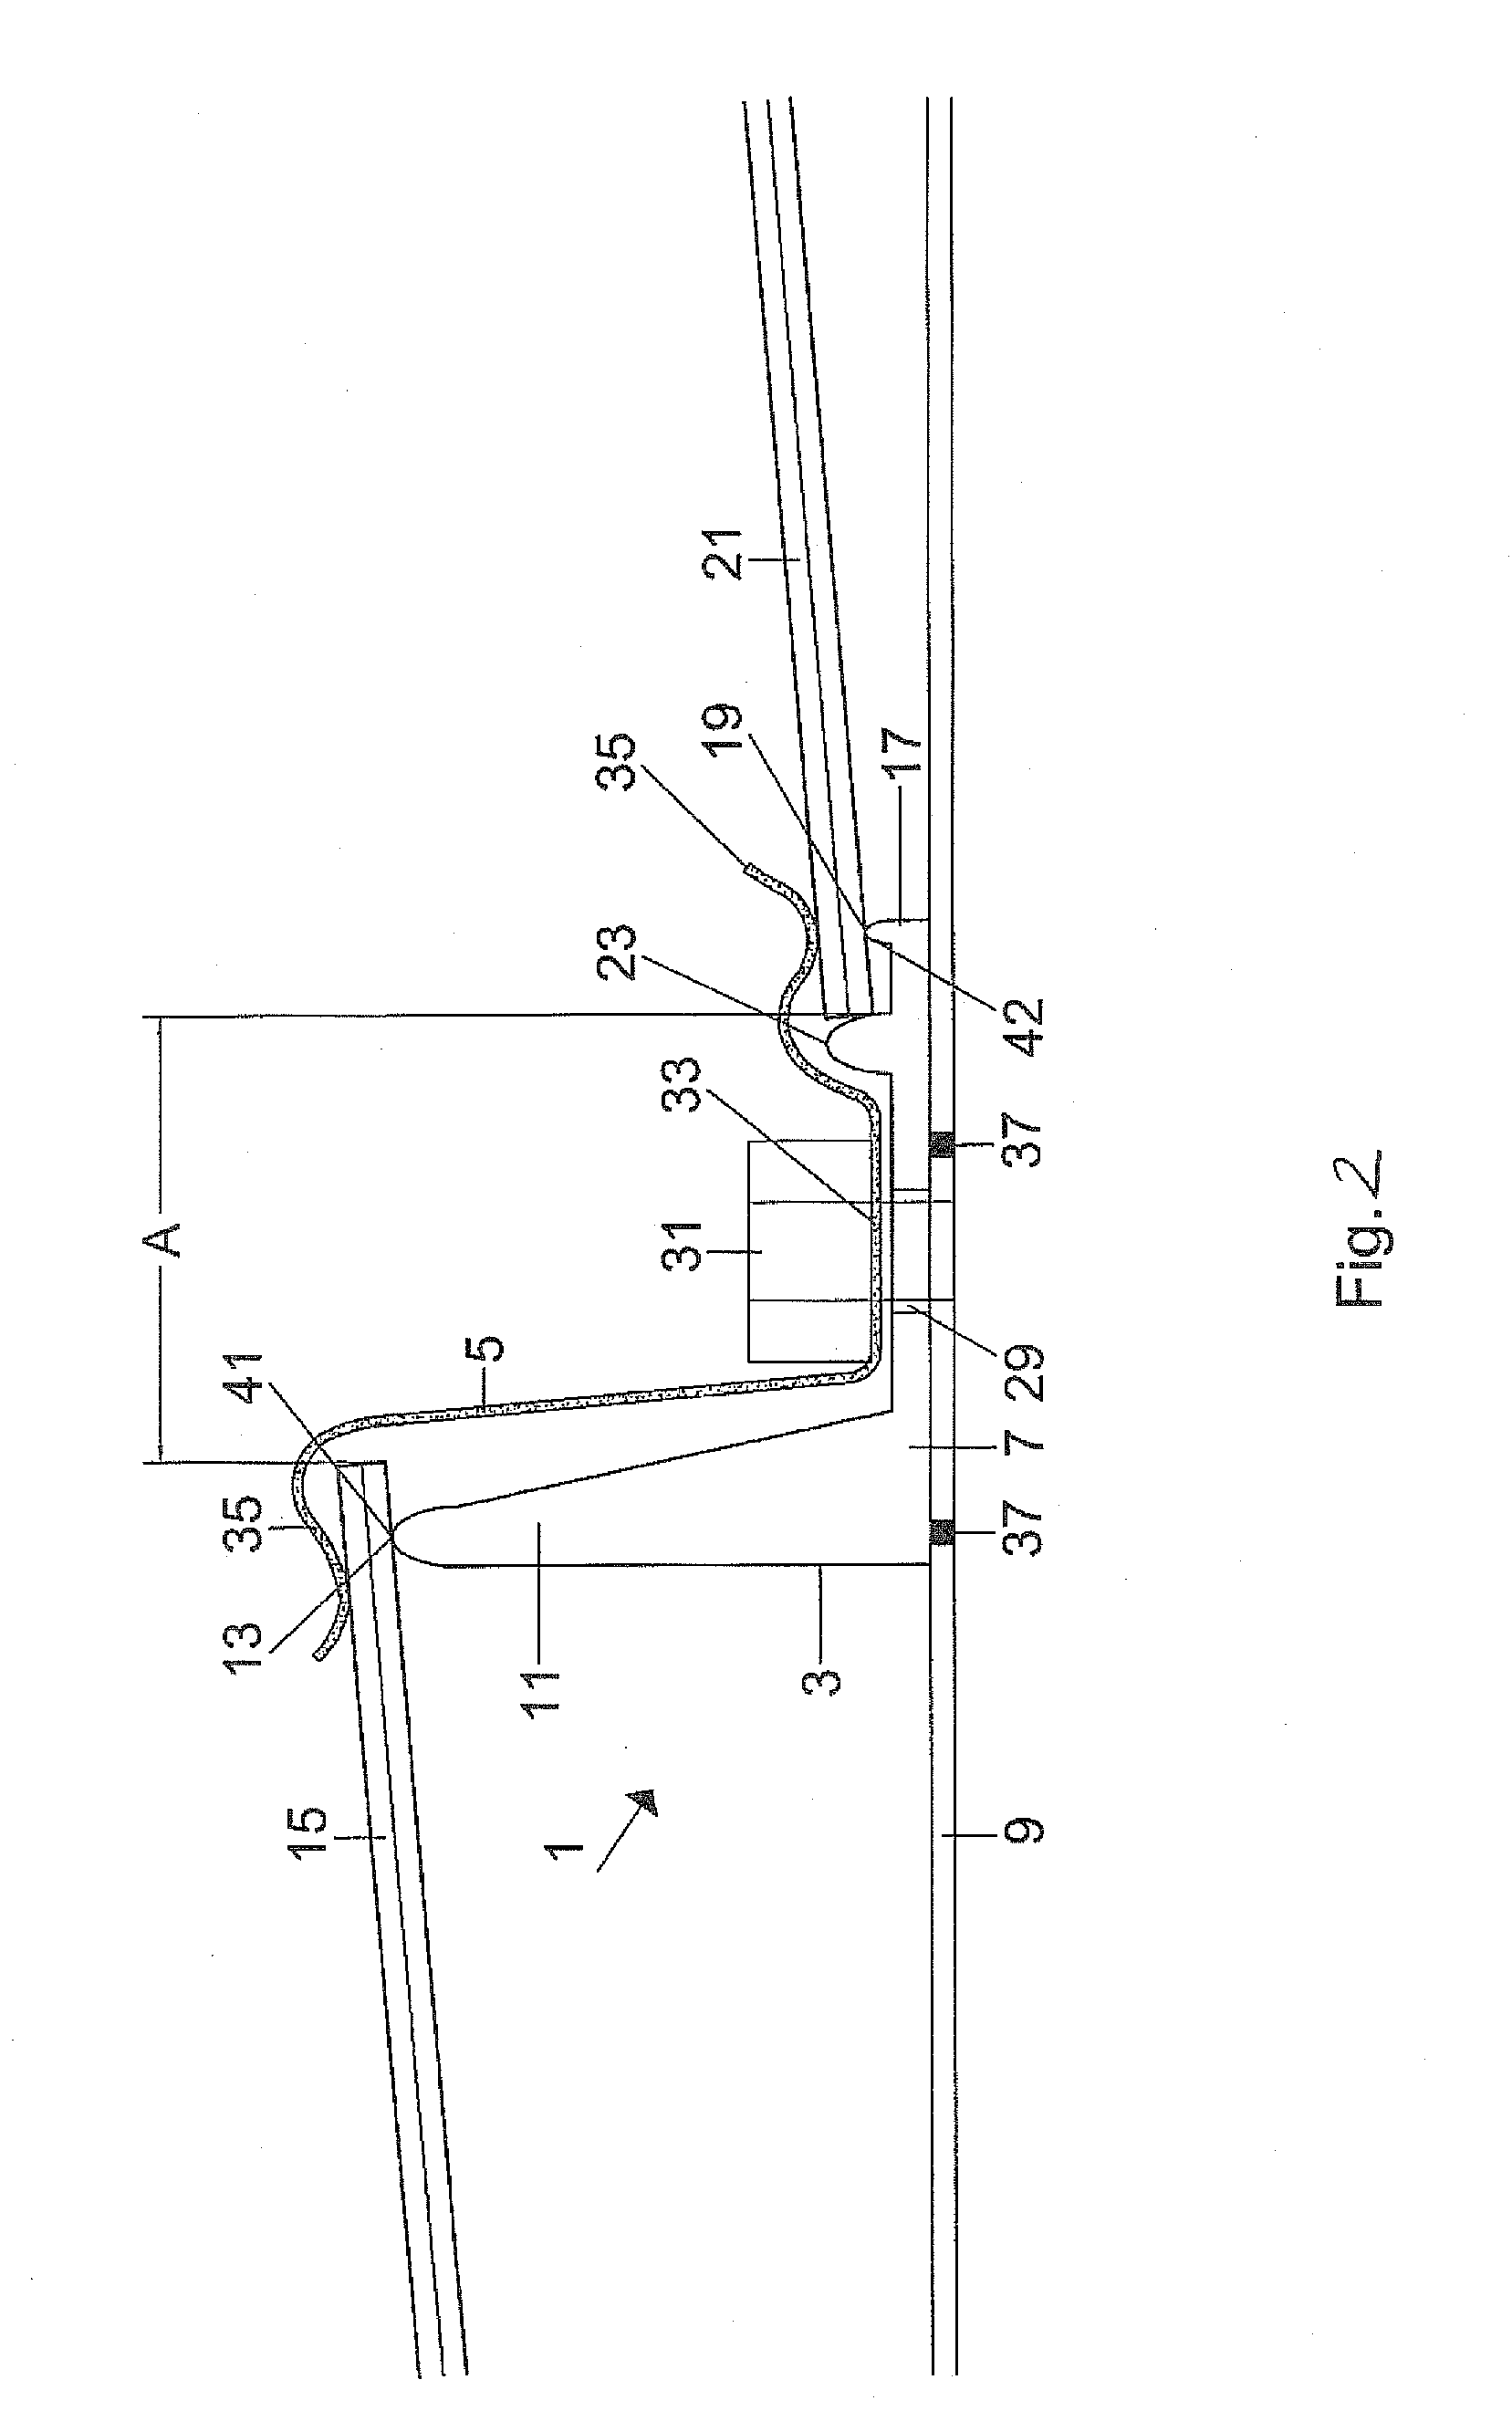 Two-level clamp for photovoltaic modules